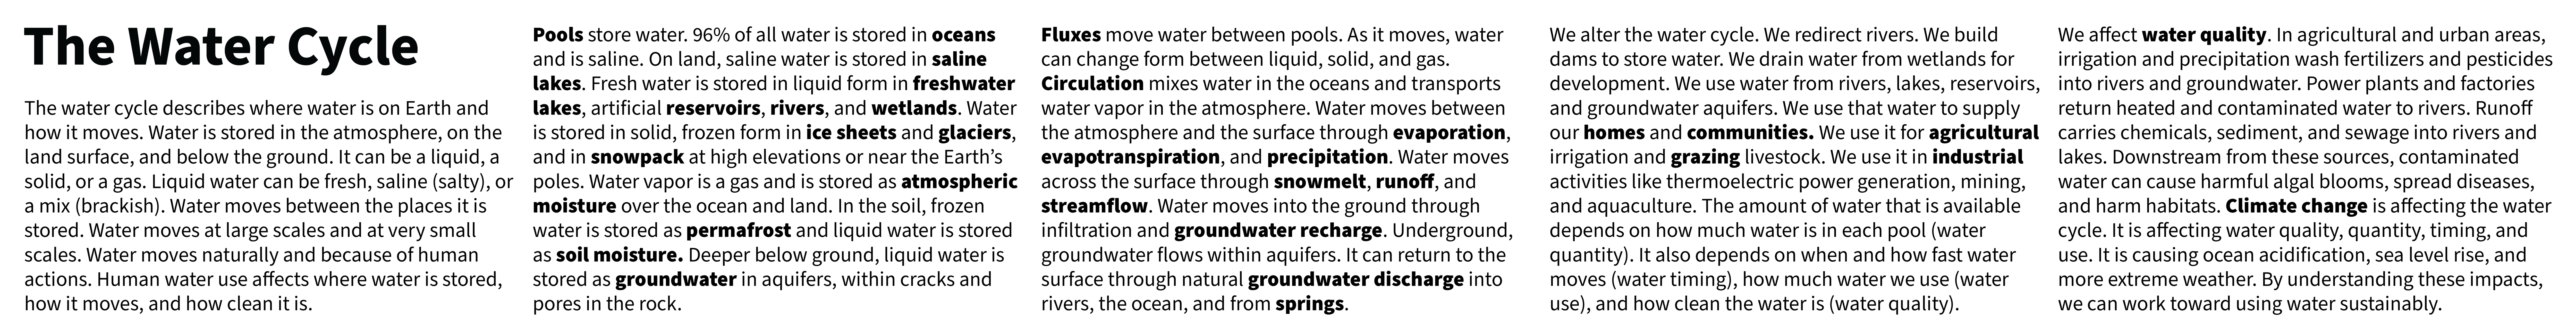 The inset, or narrative text, that accompanies the diagram at the bottom of the graphic. It provides a brief description of the water cycle, then describes the various pools and fluxes.